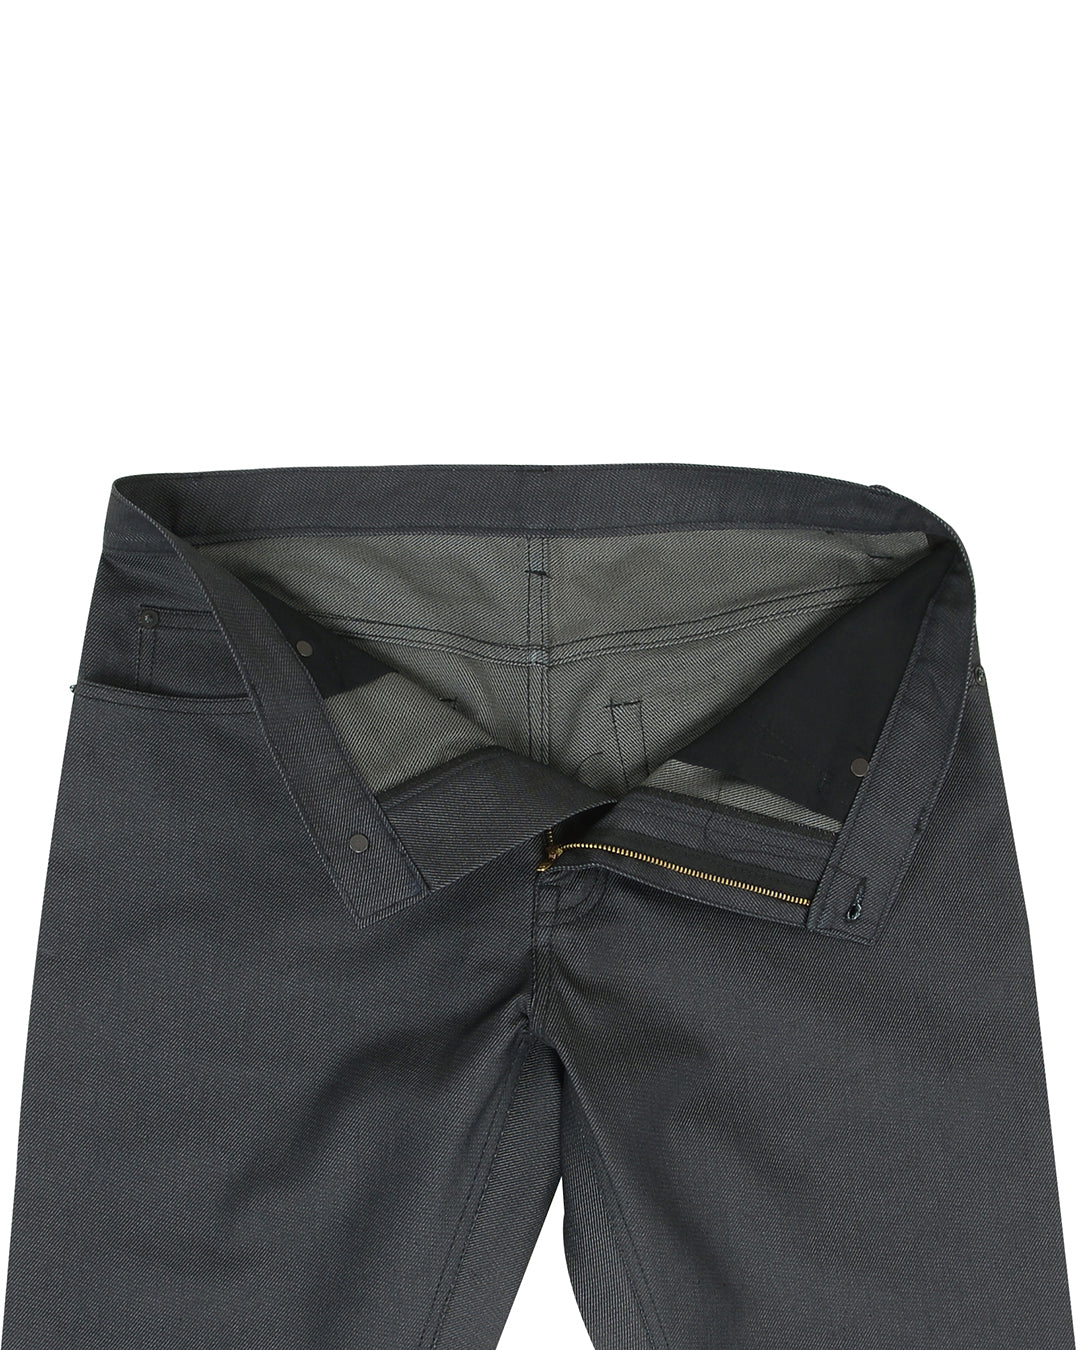 Front open view of custom waxed jeans for men by Luxire in charcoal grey